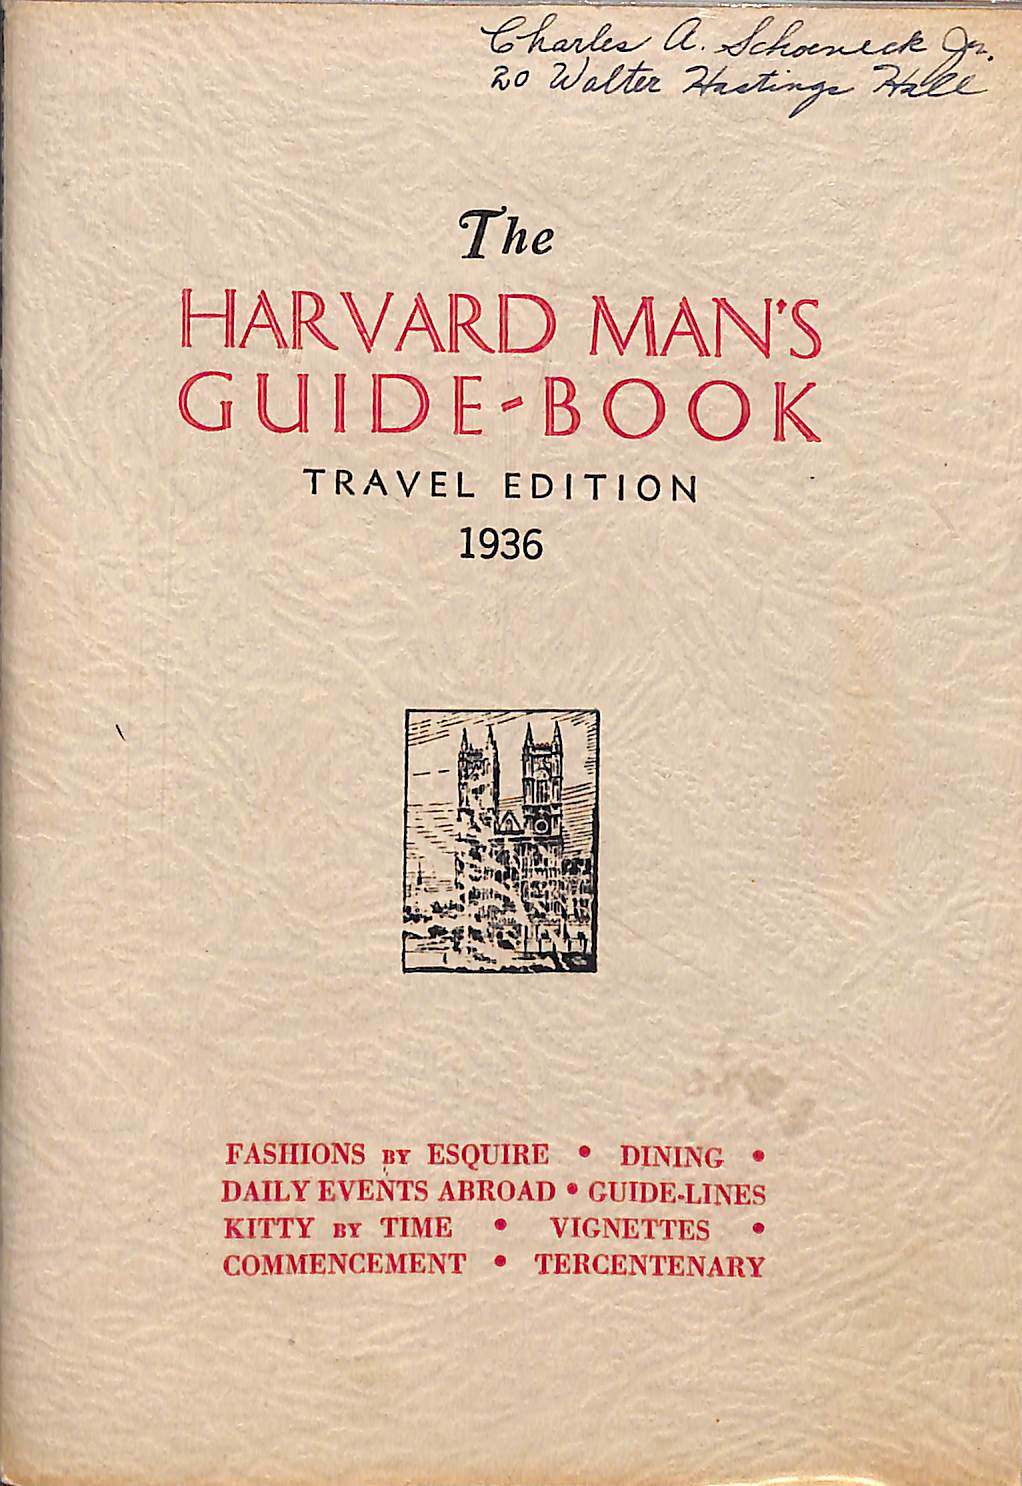 "The Harvard Man's Guide-Book Travel Edition" 1936